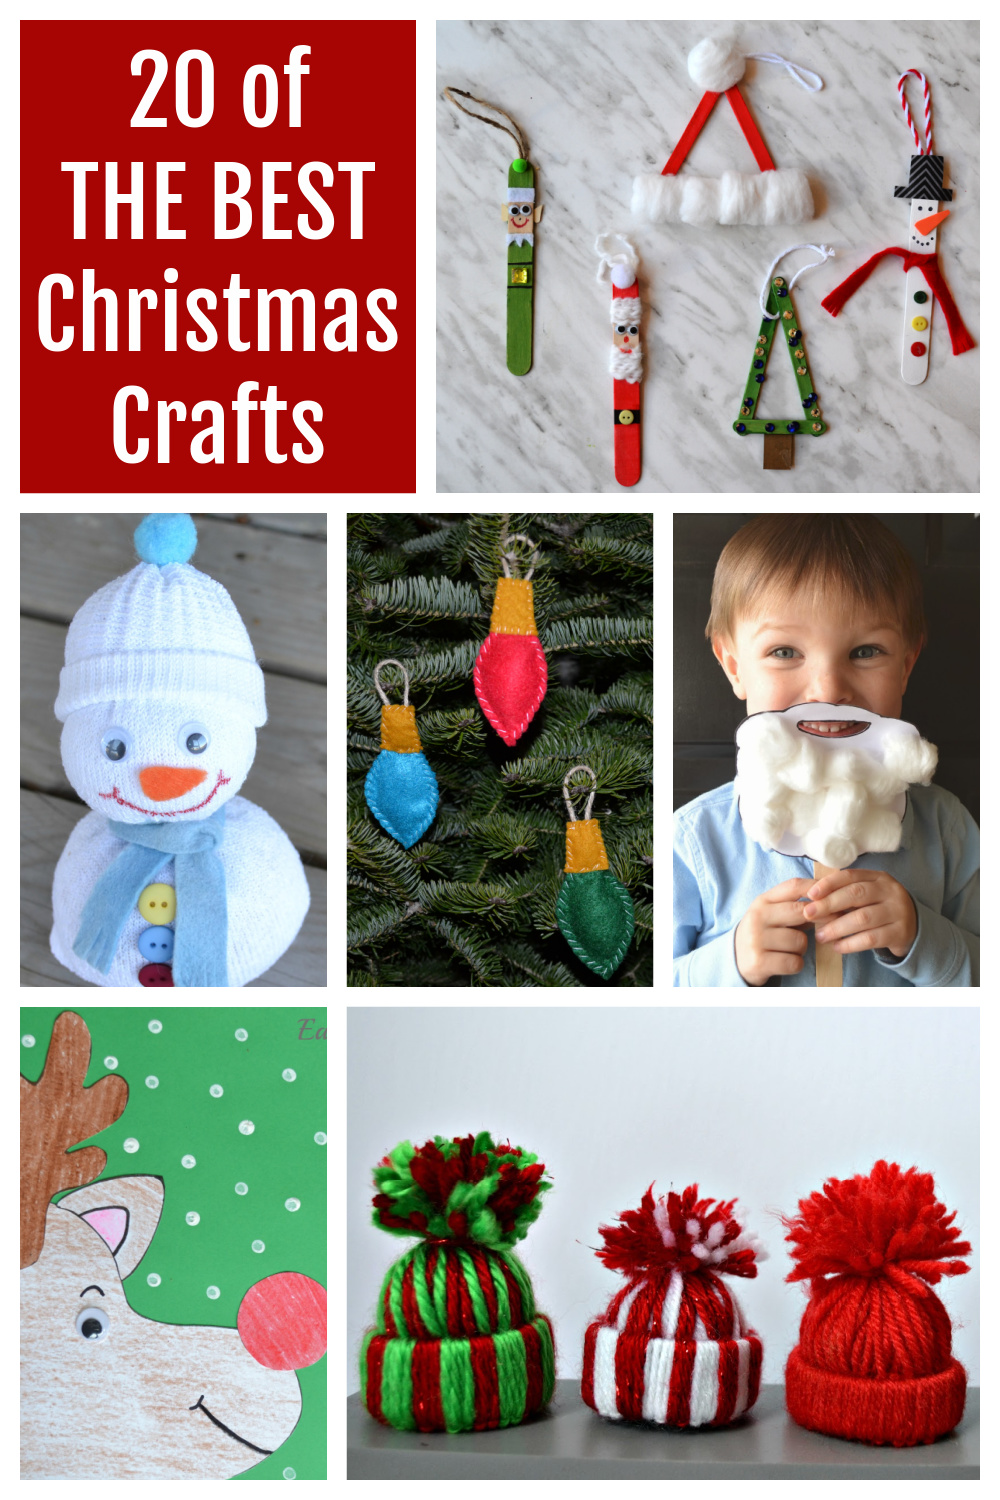 Christmas Fine Motor Activity for Kids: Cotton Balls and Q-Tips Snowman